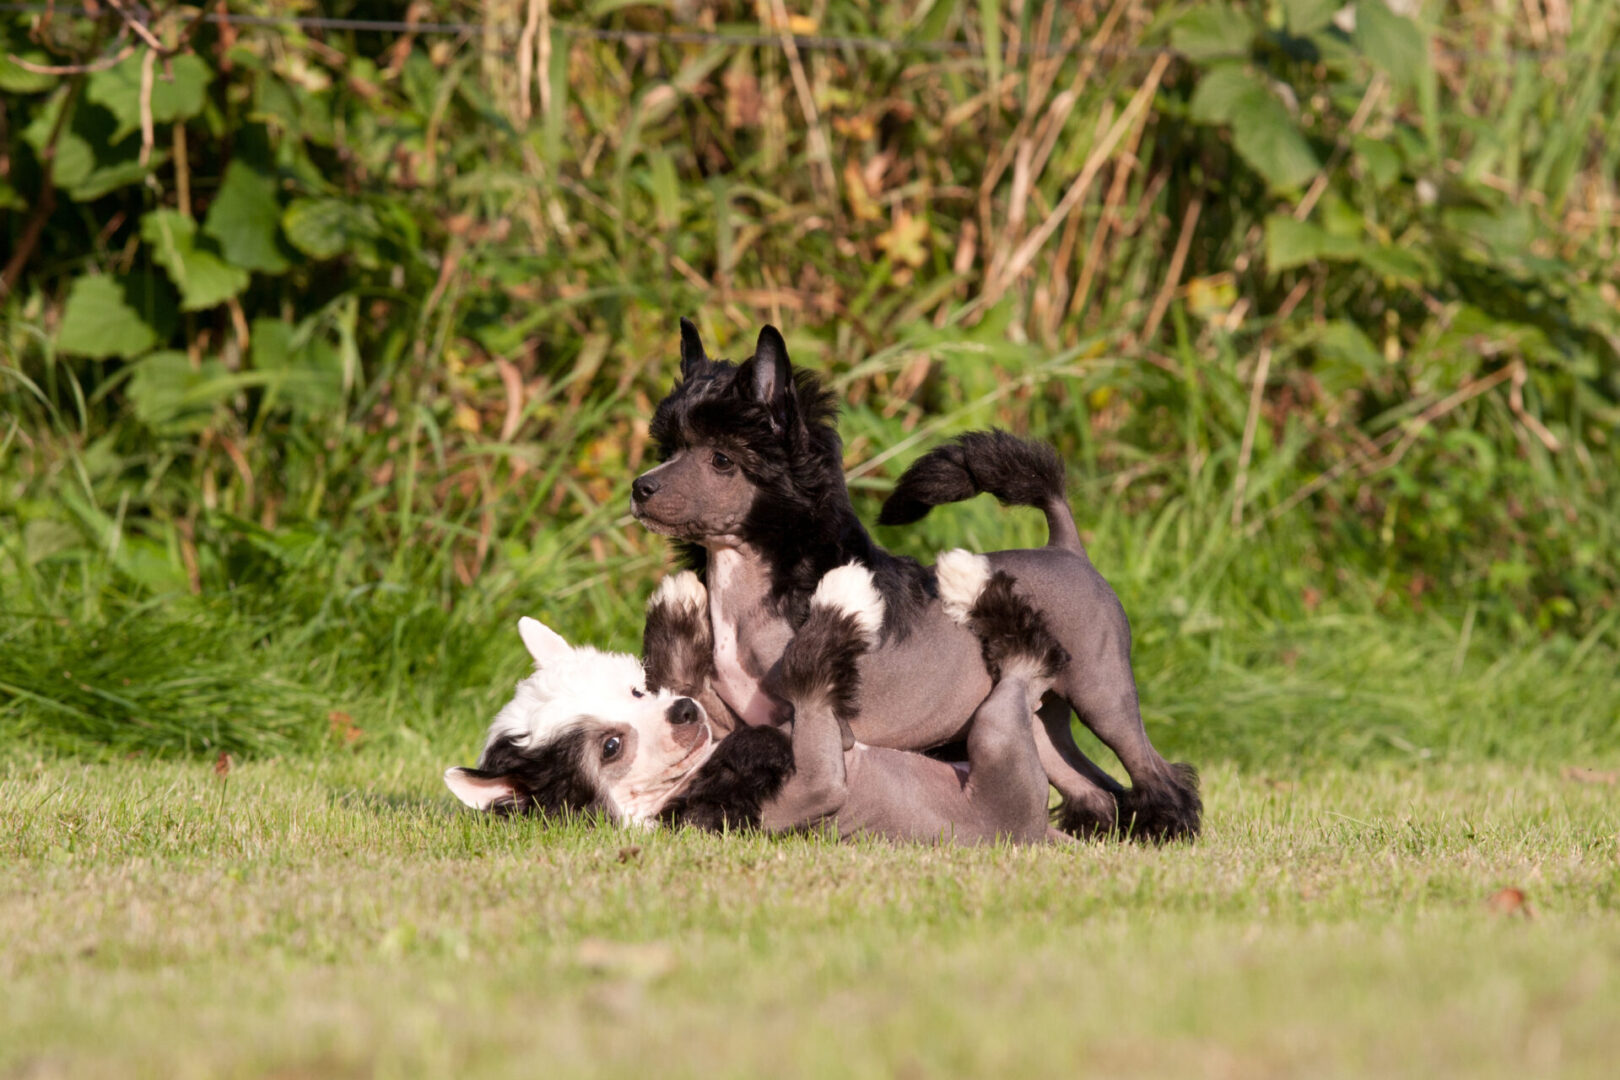 Two dogs playing in the grass together.